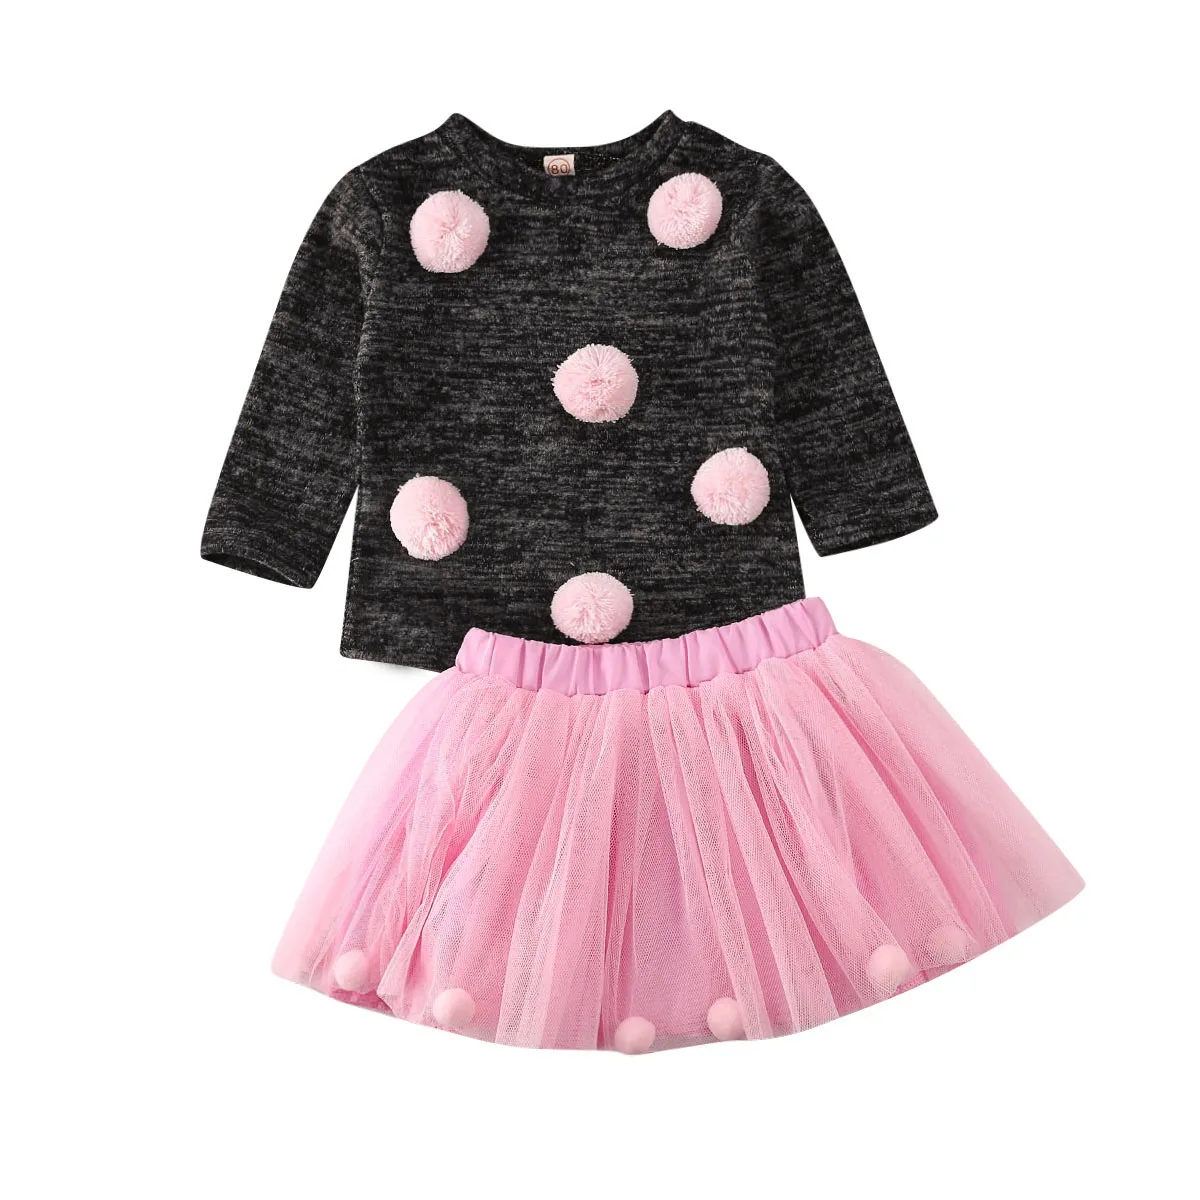 Фото 2020 Spring Autumn Toddler Baby Girls Clothes Sets 6M-4Y Infant Girl Knitted Balls Tops Sweaters +Tulle Skirt Outfits 2PCS | Мать и